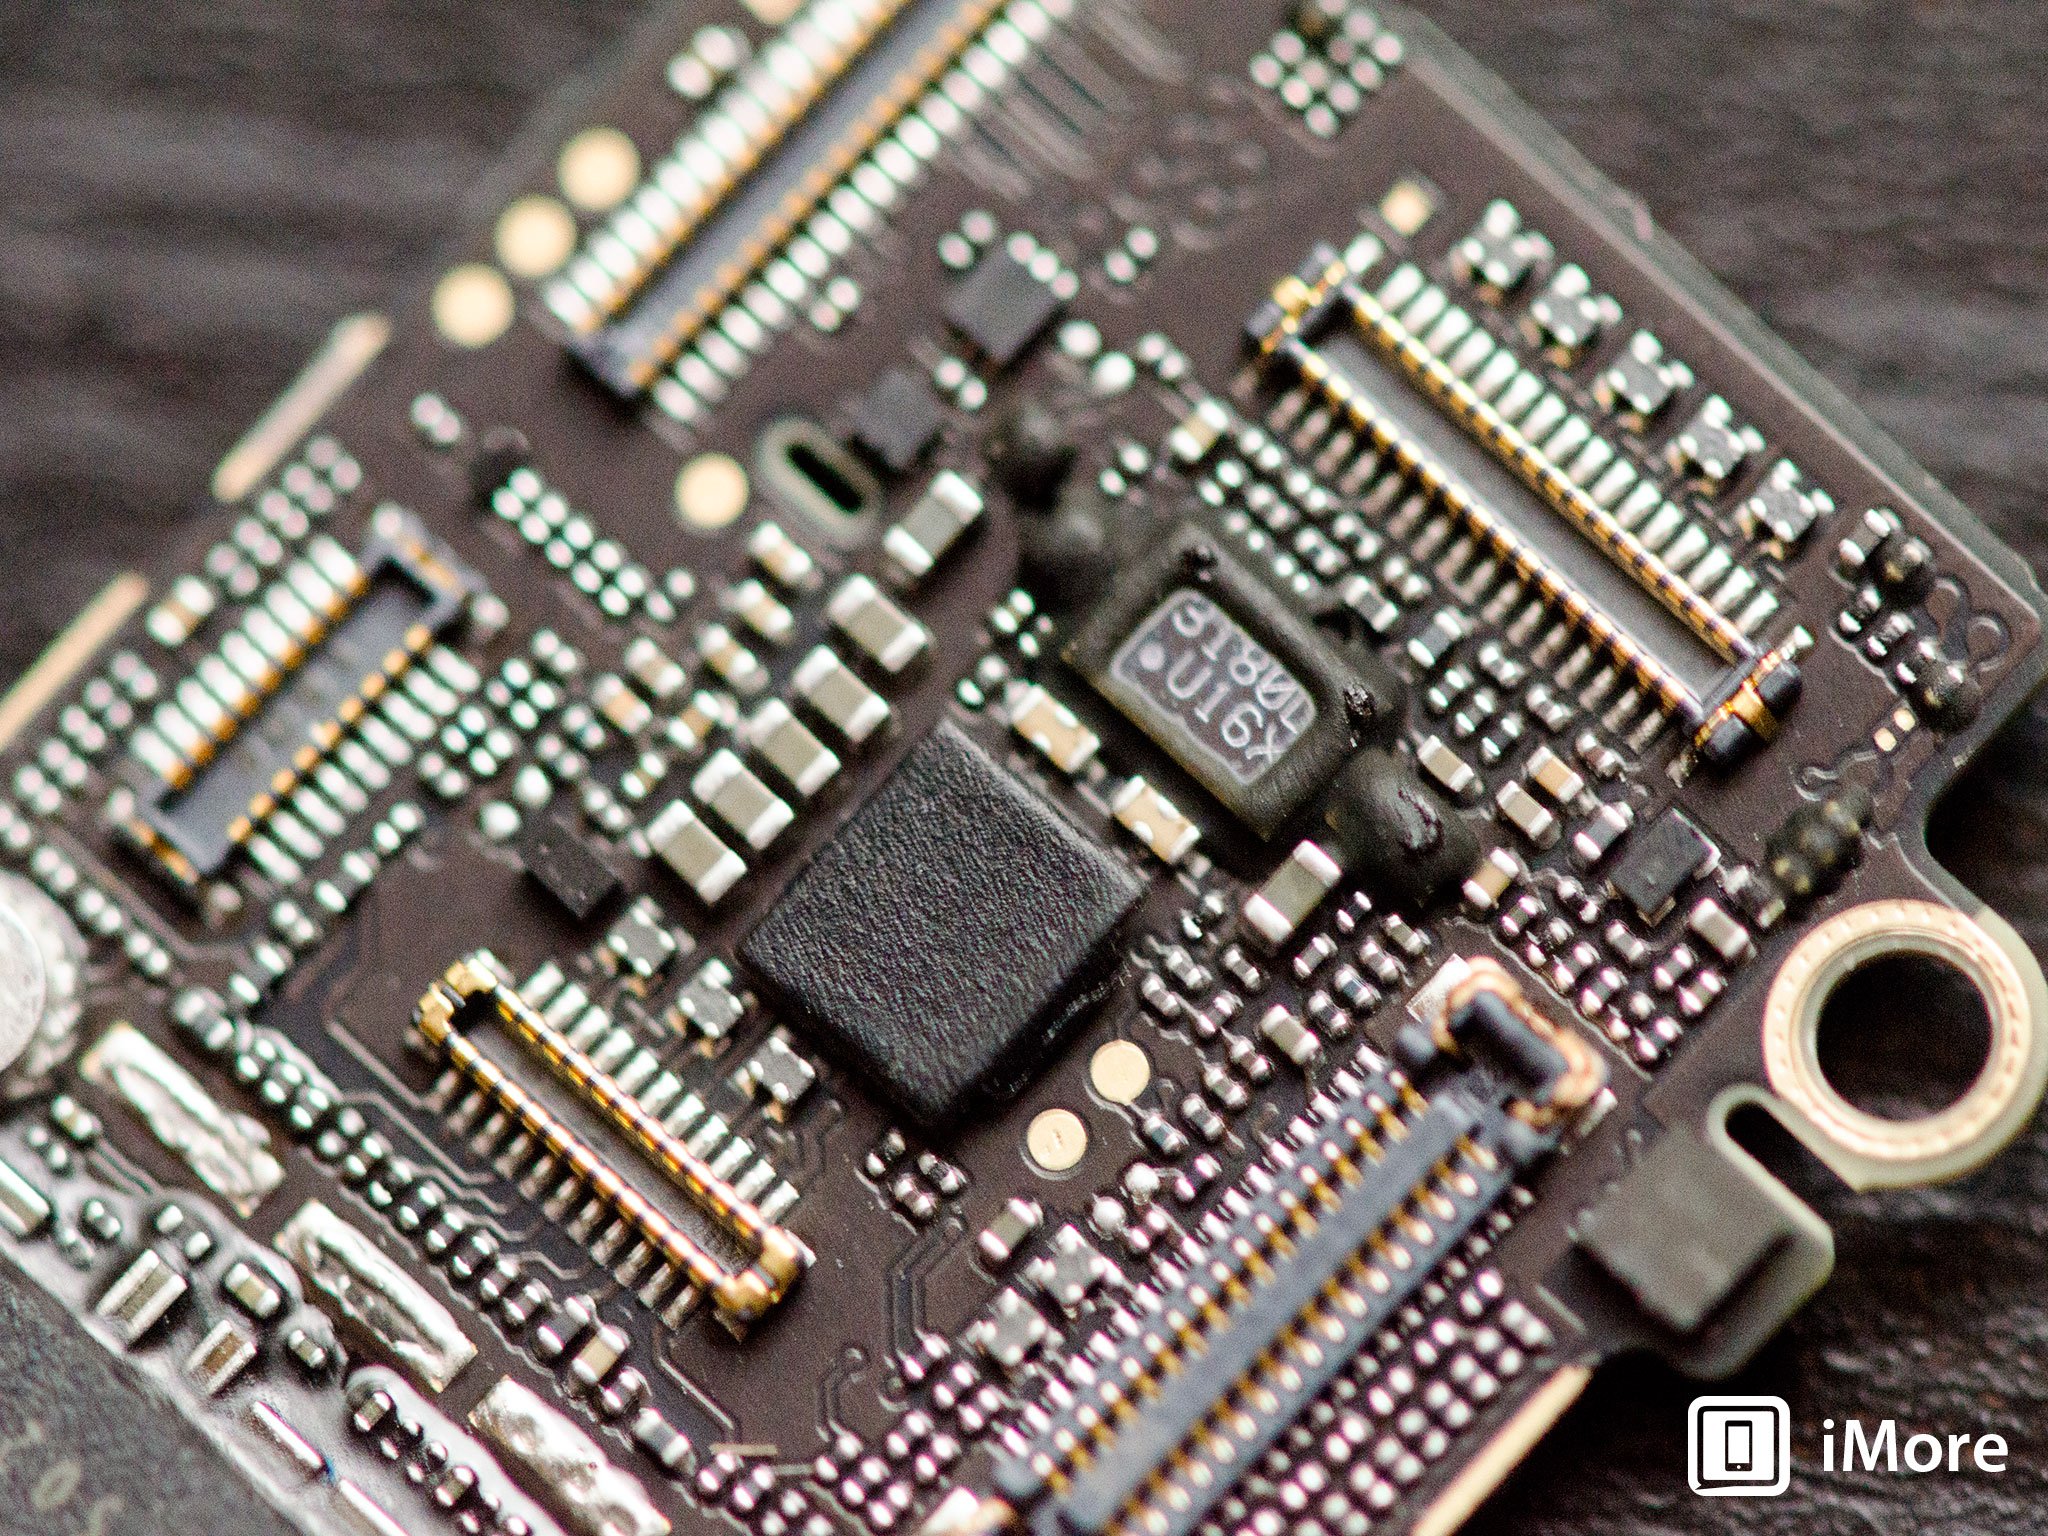 A look at the top of the board. See that middle chipset there? That&#39;s the M7!